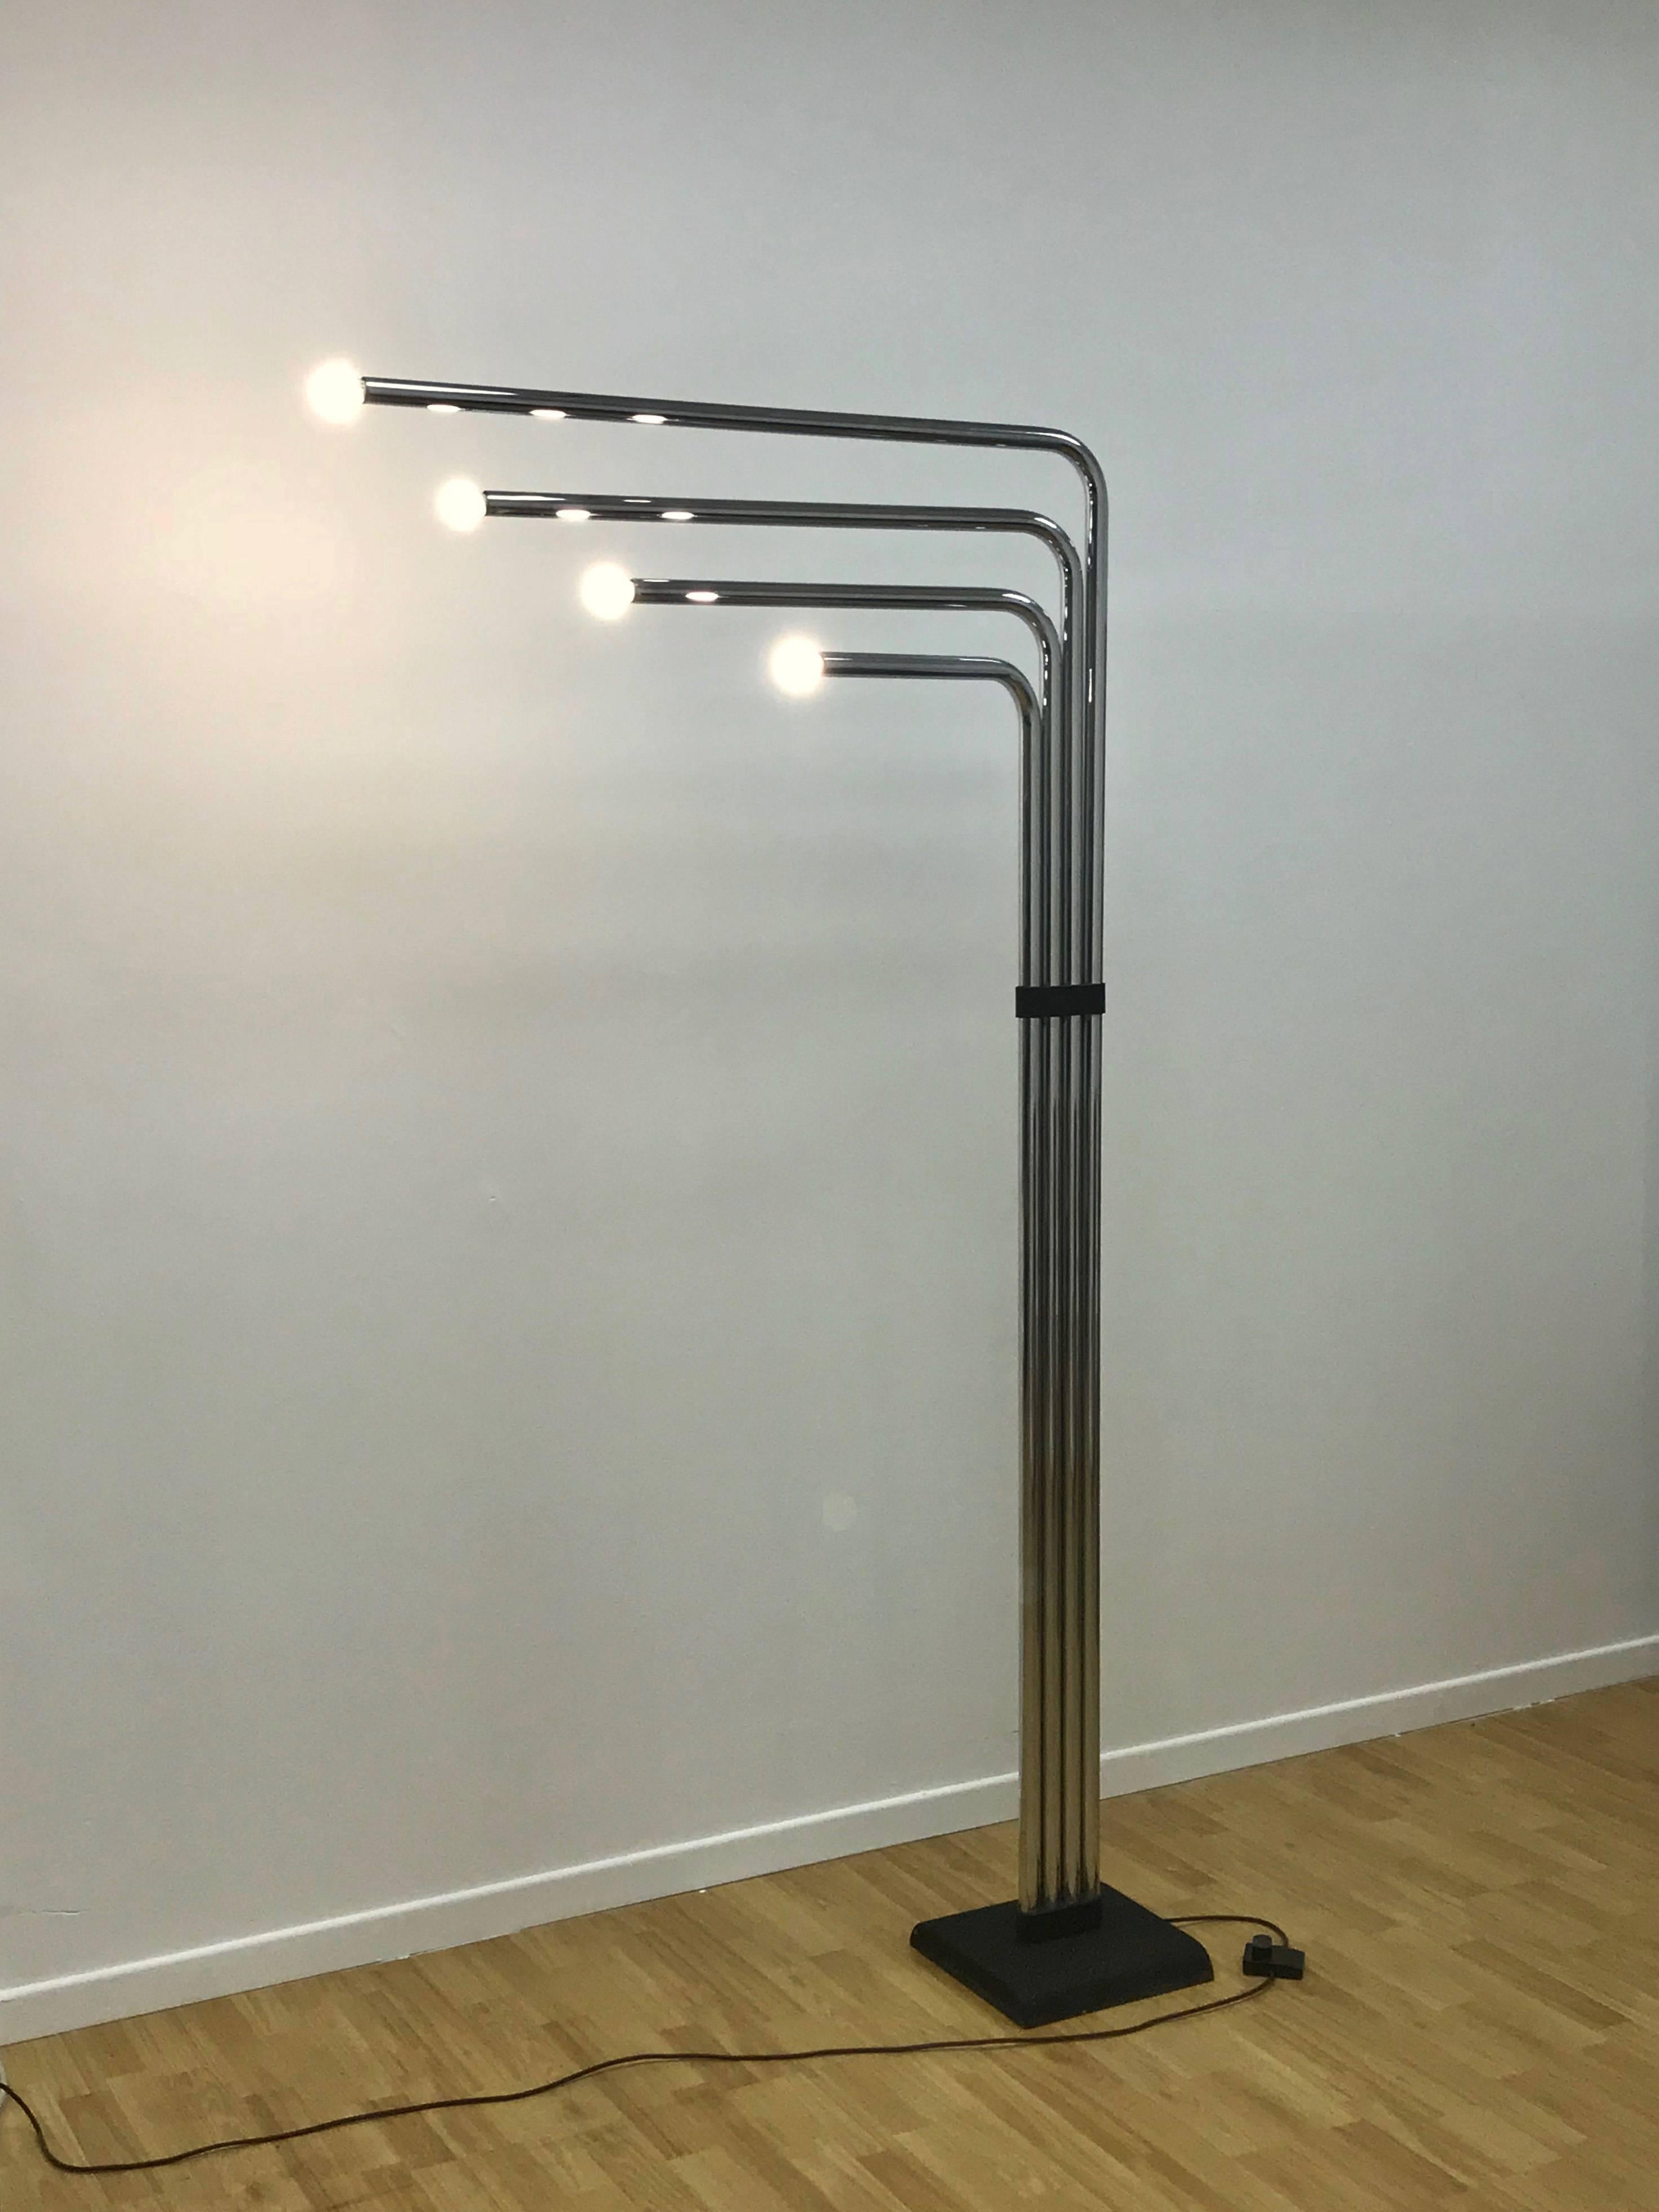 Architectural floor lamp in chromed metal made by Reggiani. It is the tallest lamp the manufacturer ever made and jas four modular arms and lights.